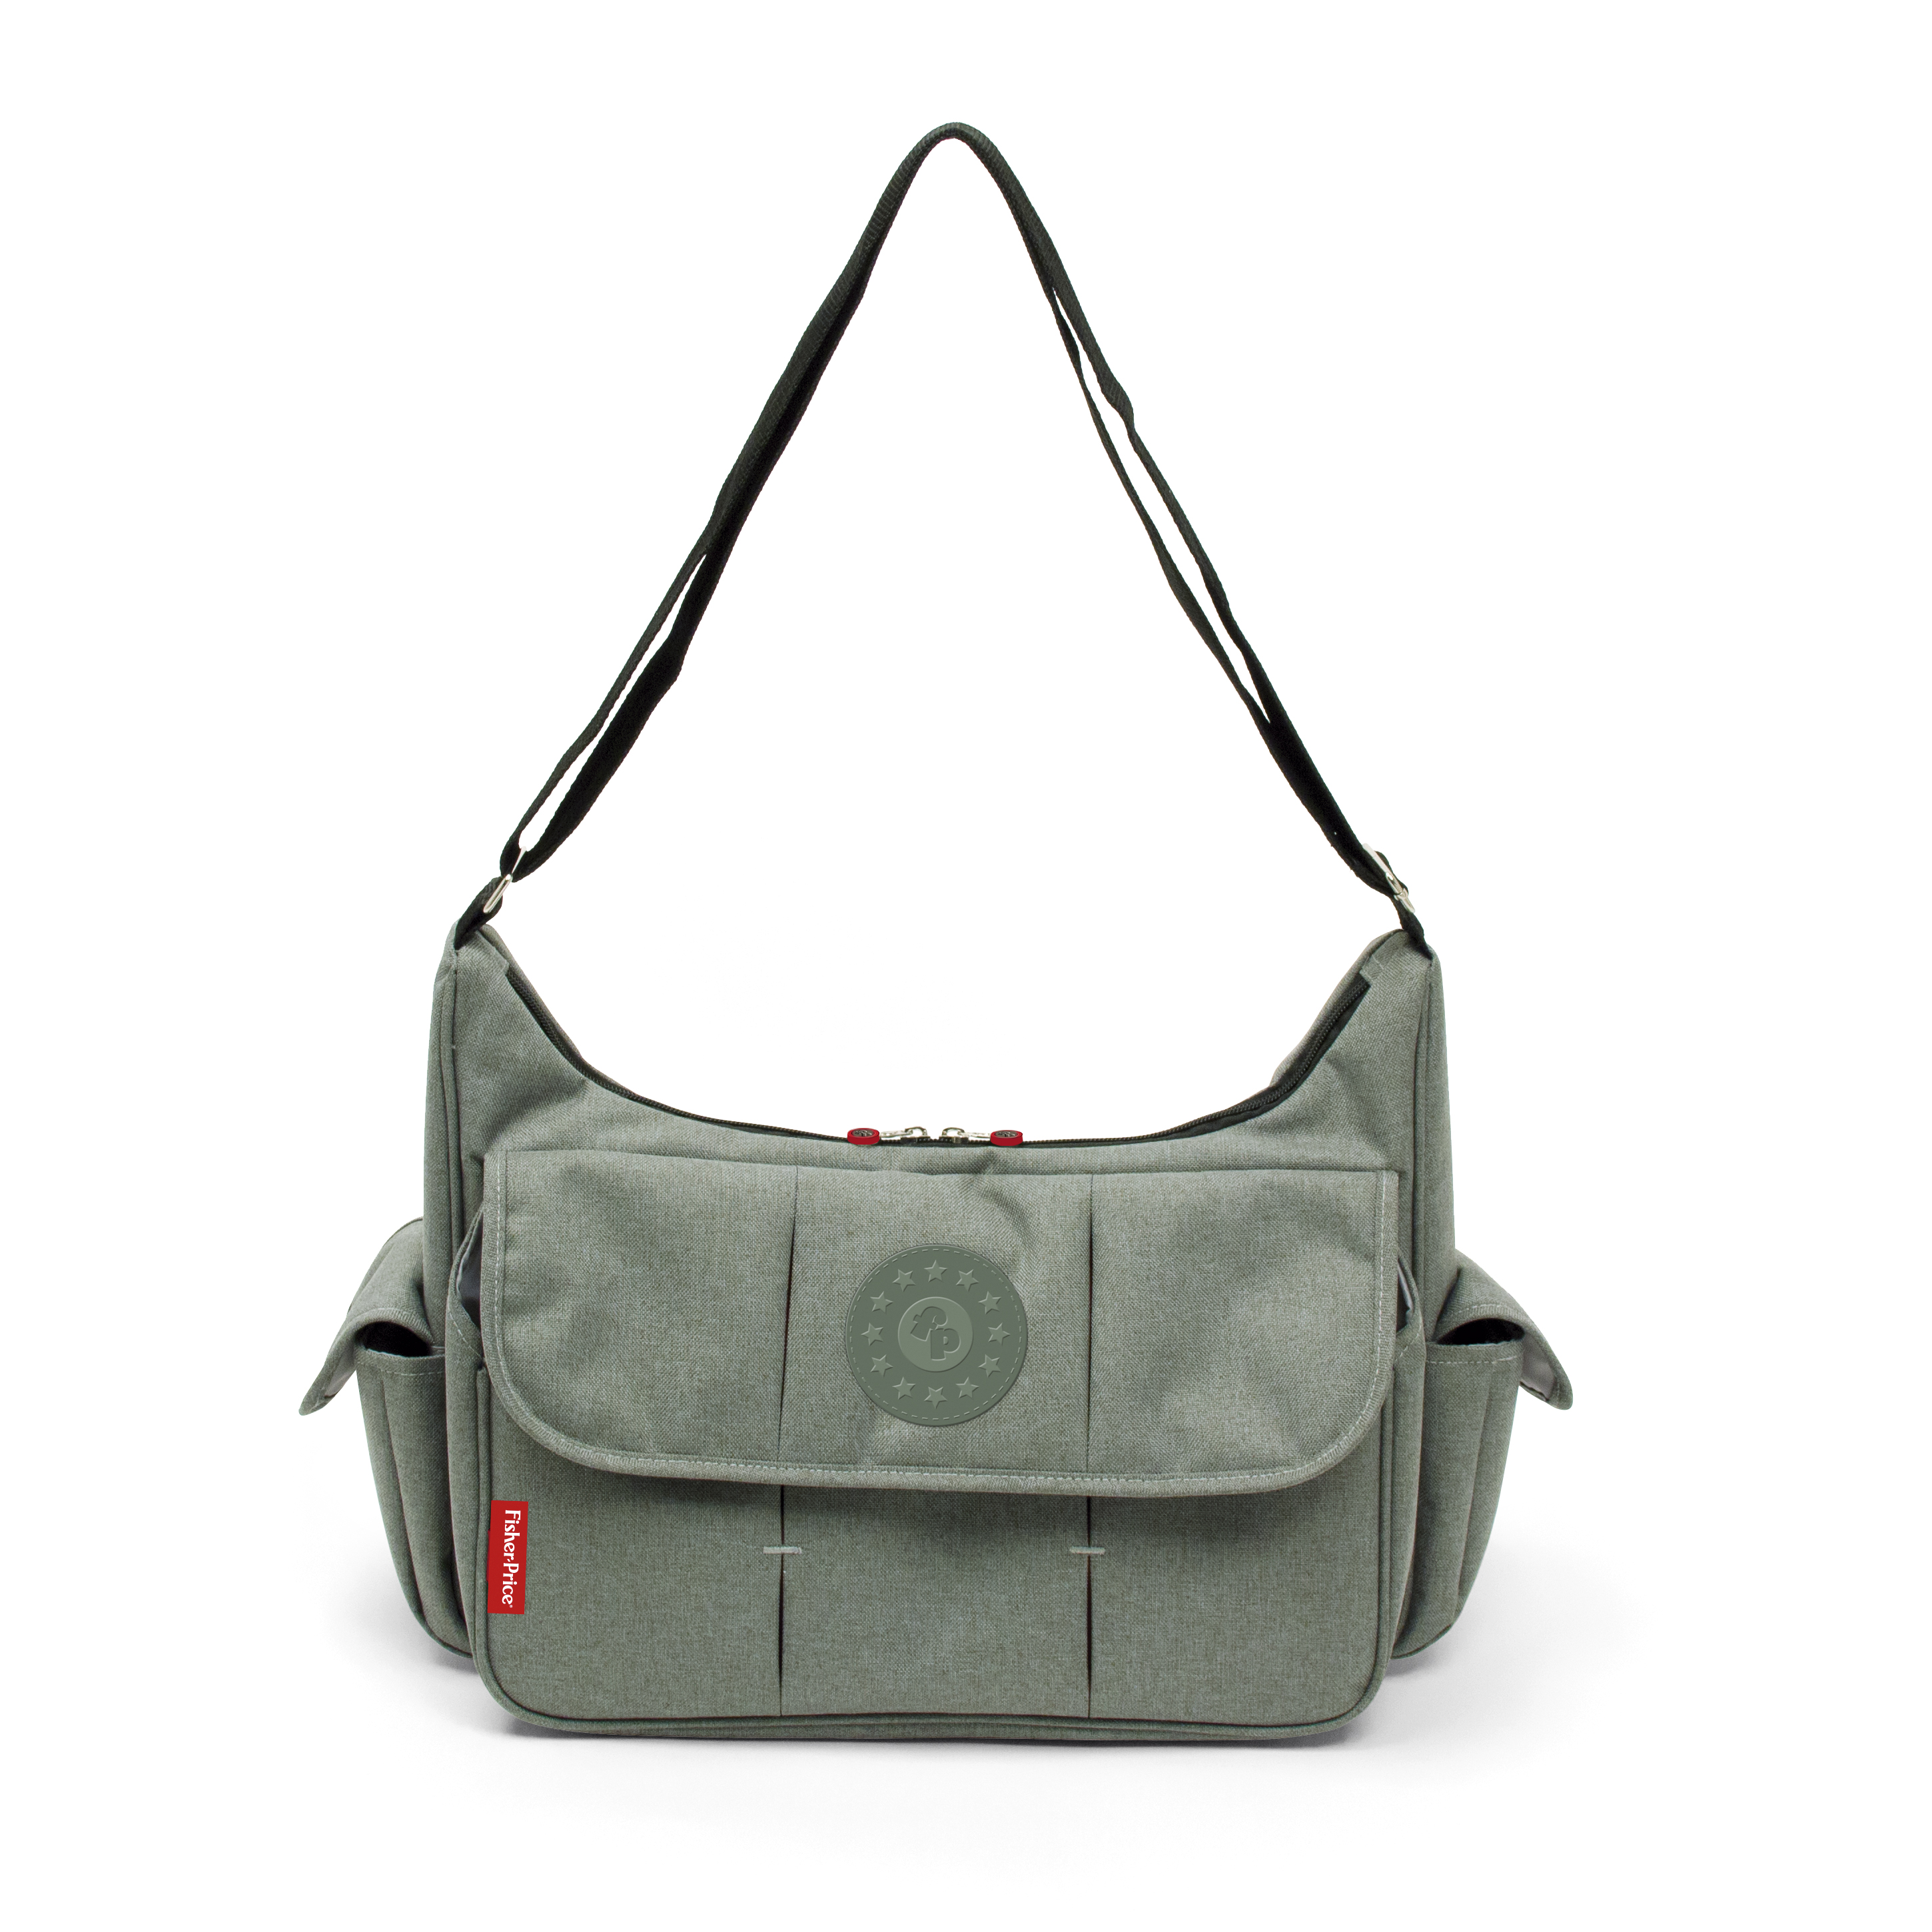 FISHER PRICE - BOLSO MATERNAL GRIS